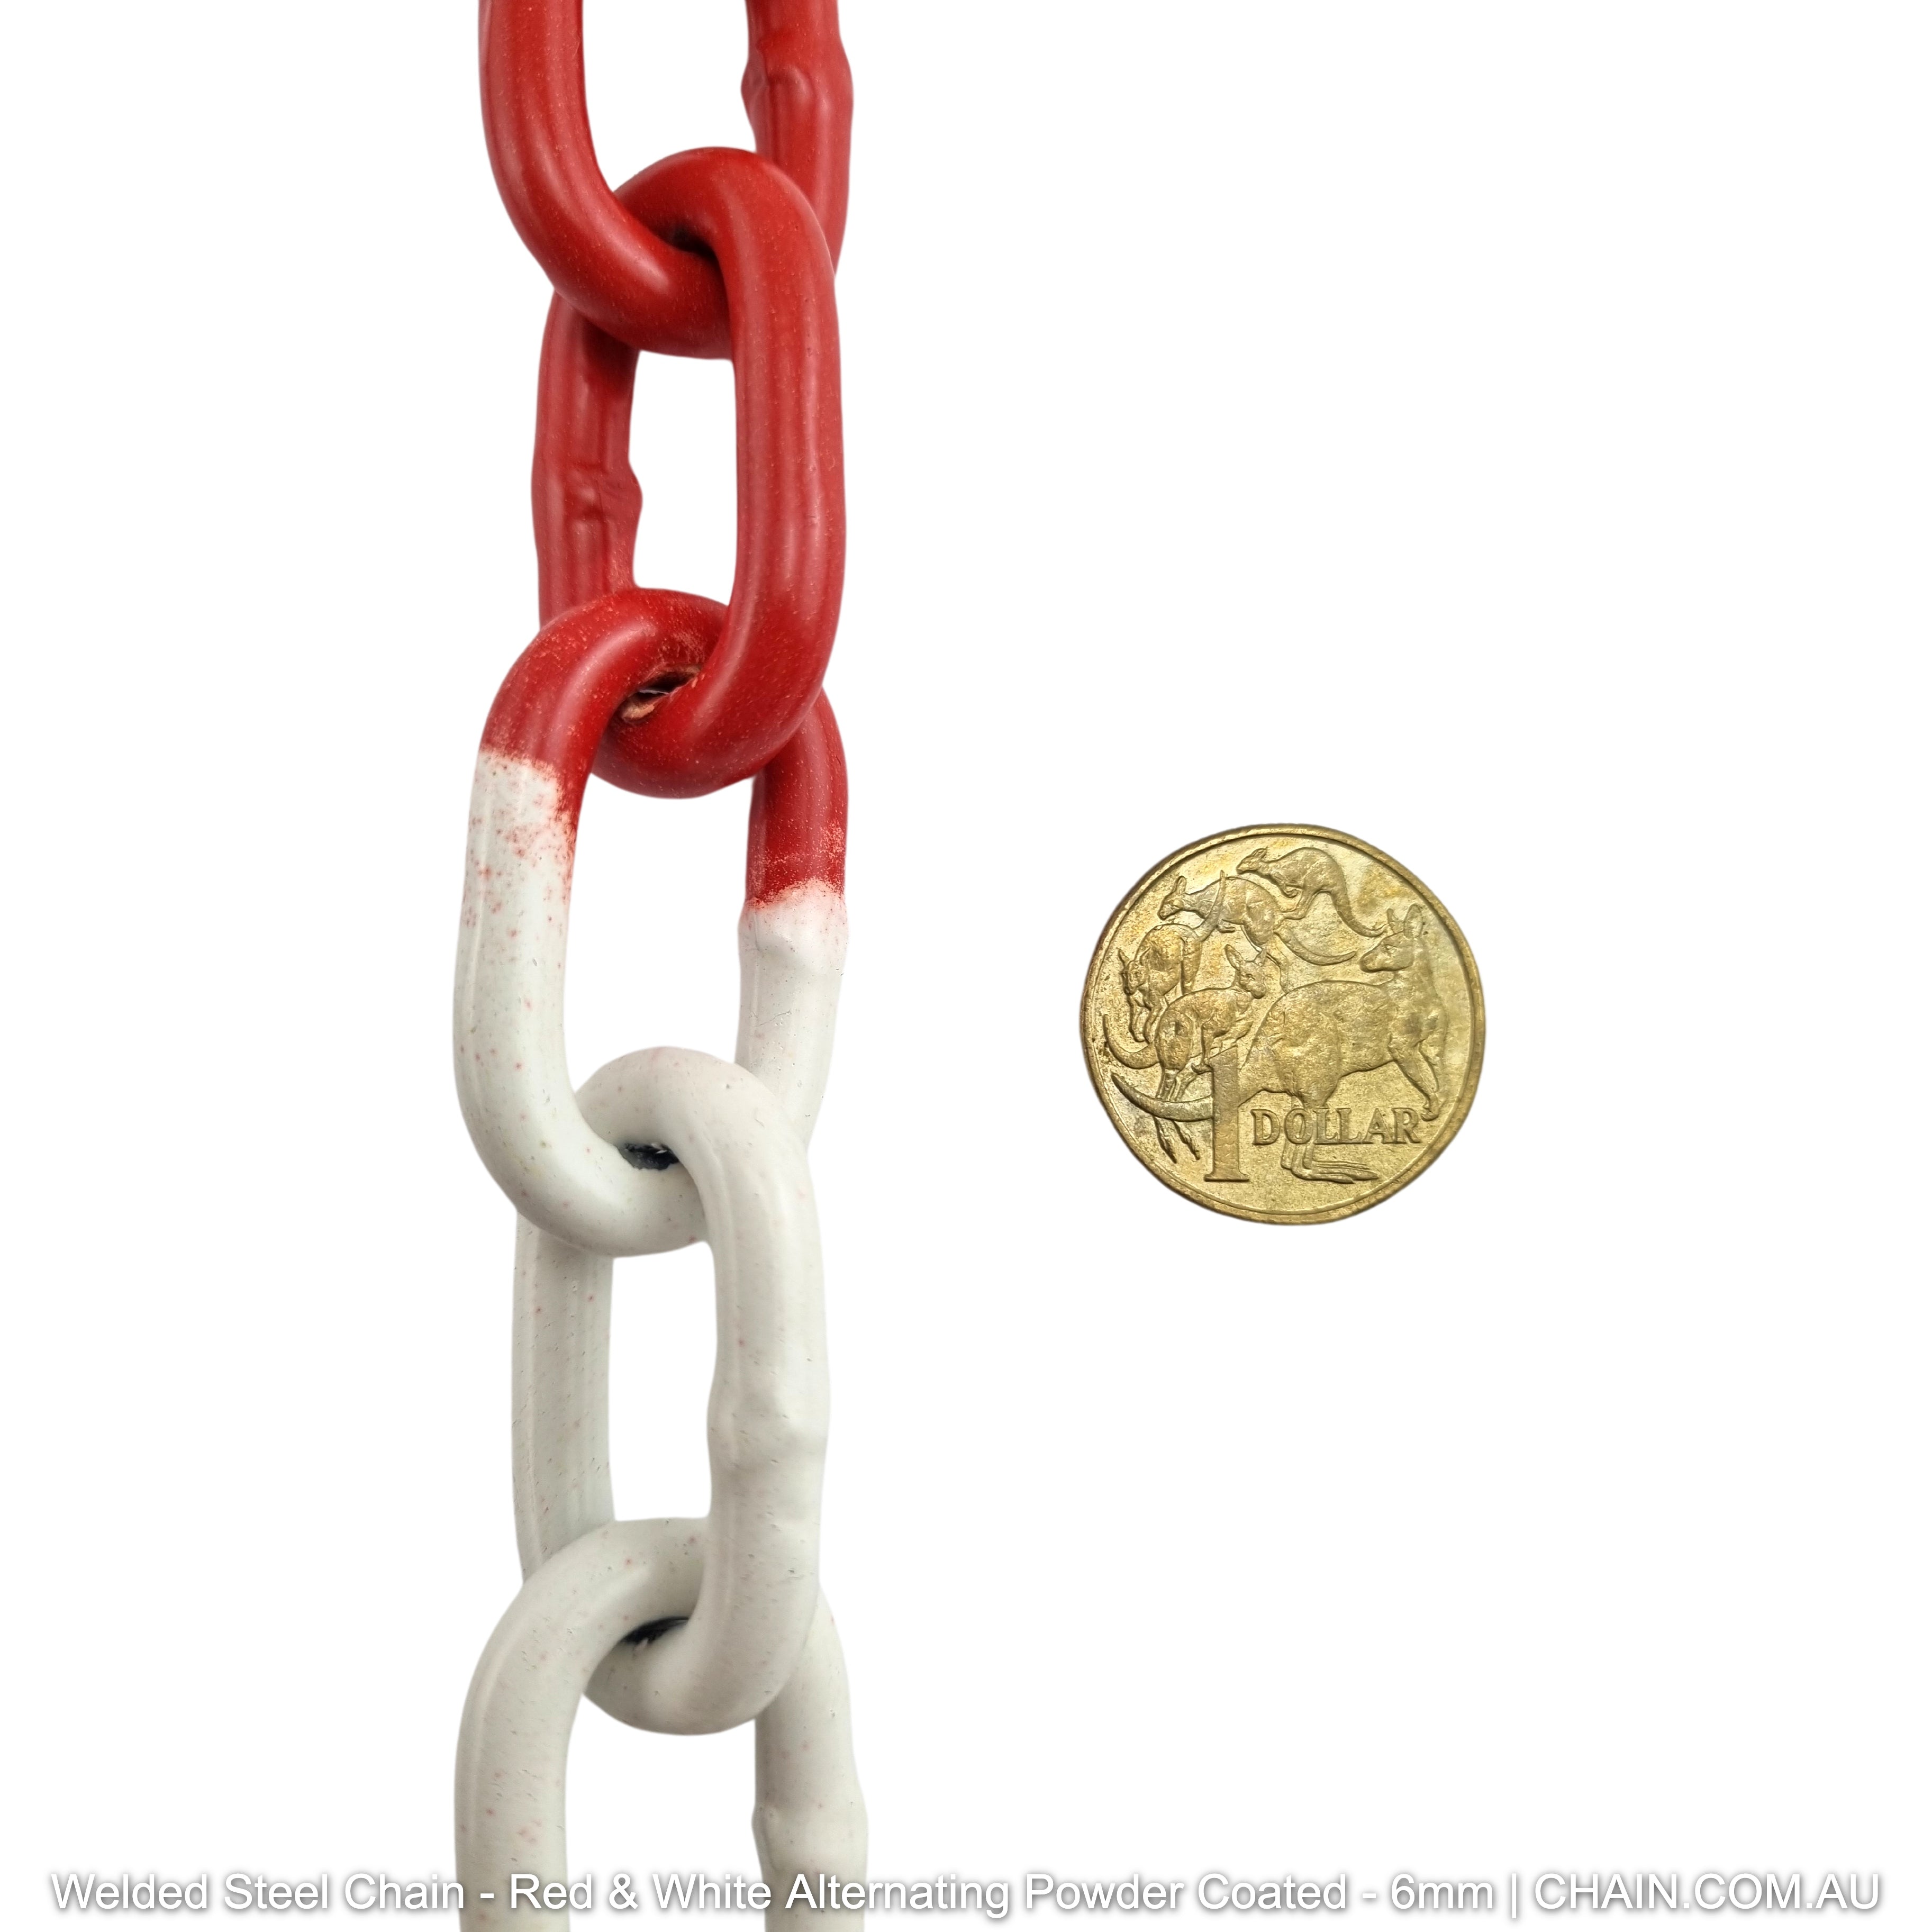 6mm Red and white alternating powder-coated welded steel chain. Australia wide Shipping. Buy from 1m. Chain.com.au